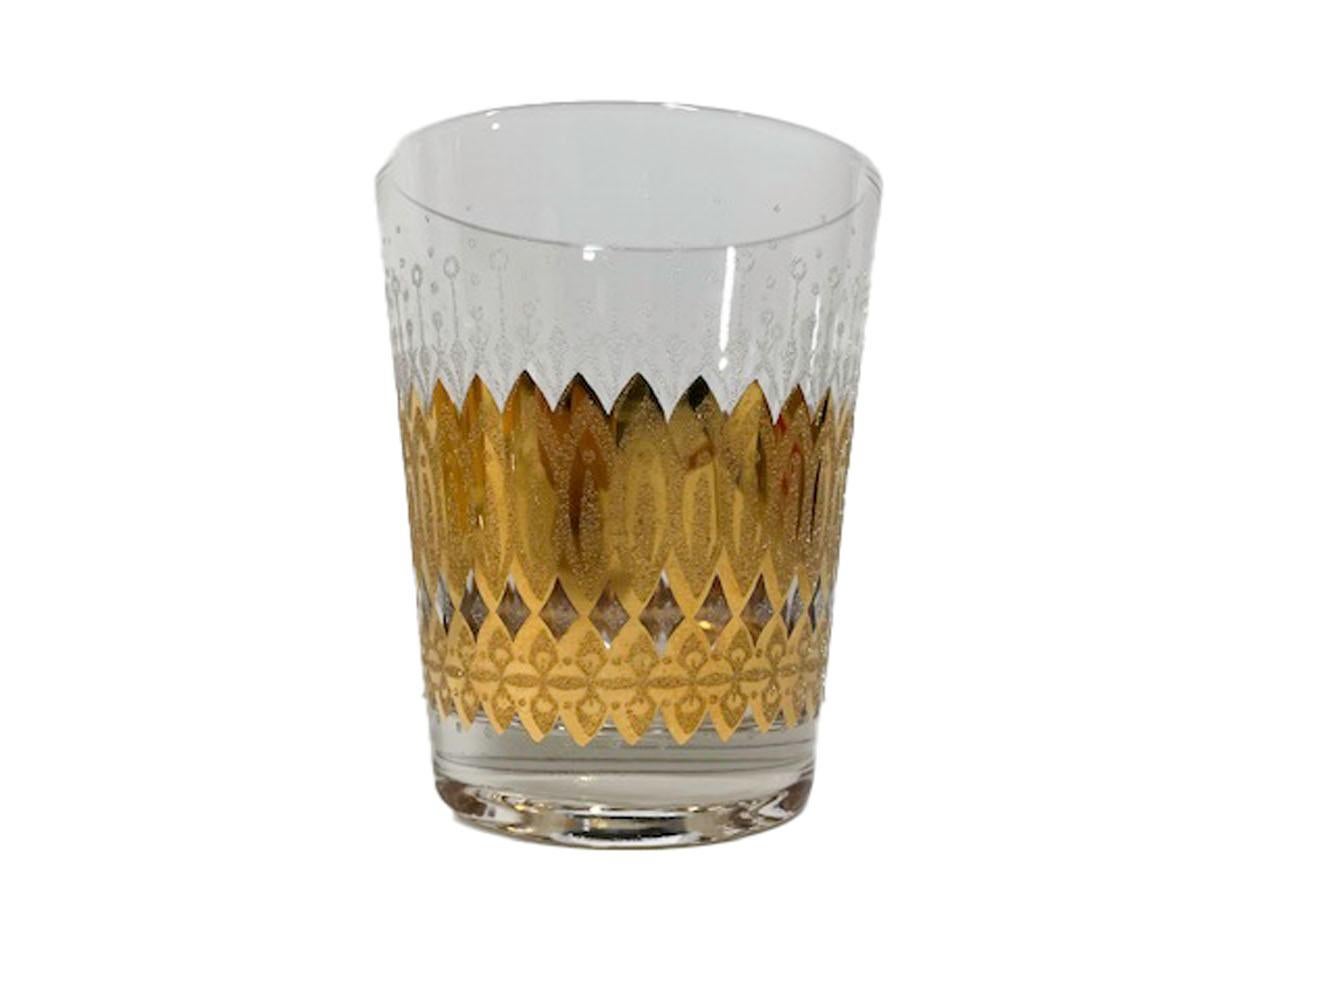 Four Mid-Century Modern double old fashioned glasses designed by Irene Pasinski. Decorated in 22k gold with raised 'sugared' patterns below stylized floral motifs in clear 'sugared' frosted enamel.